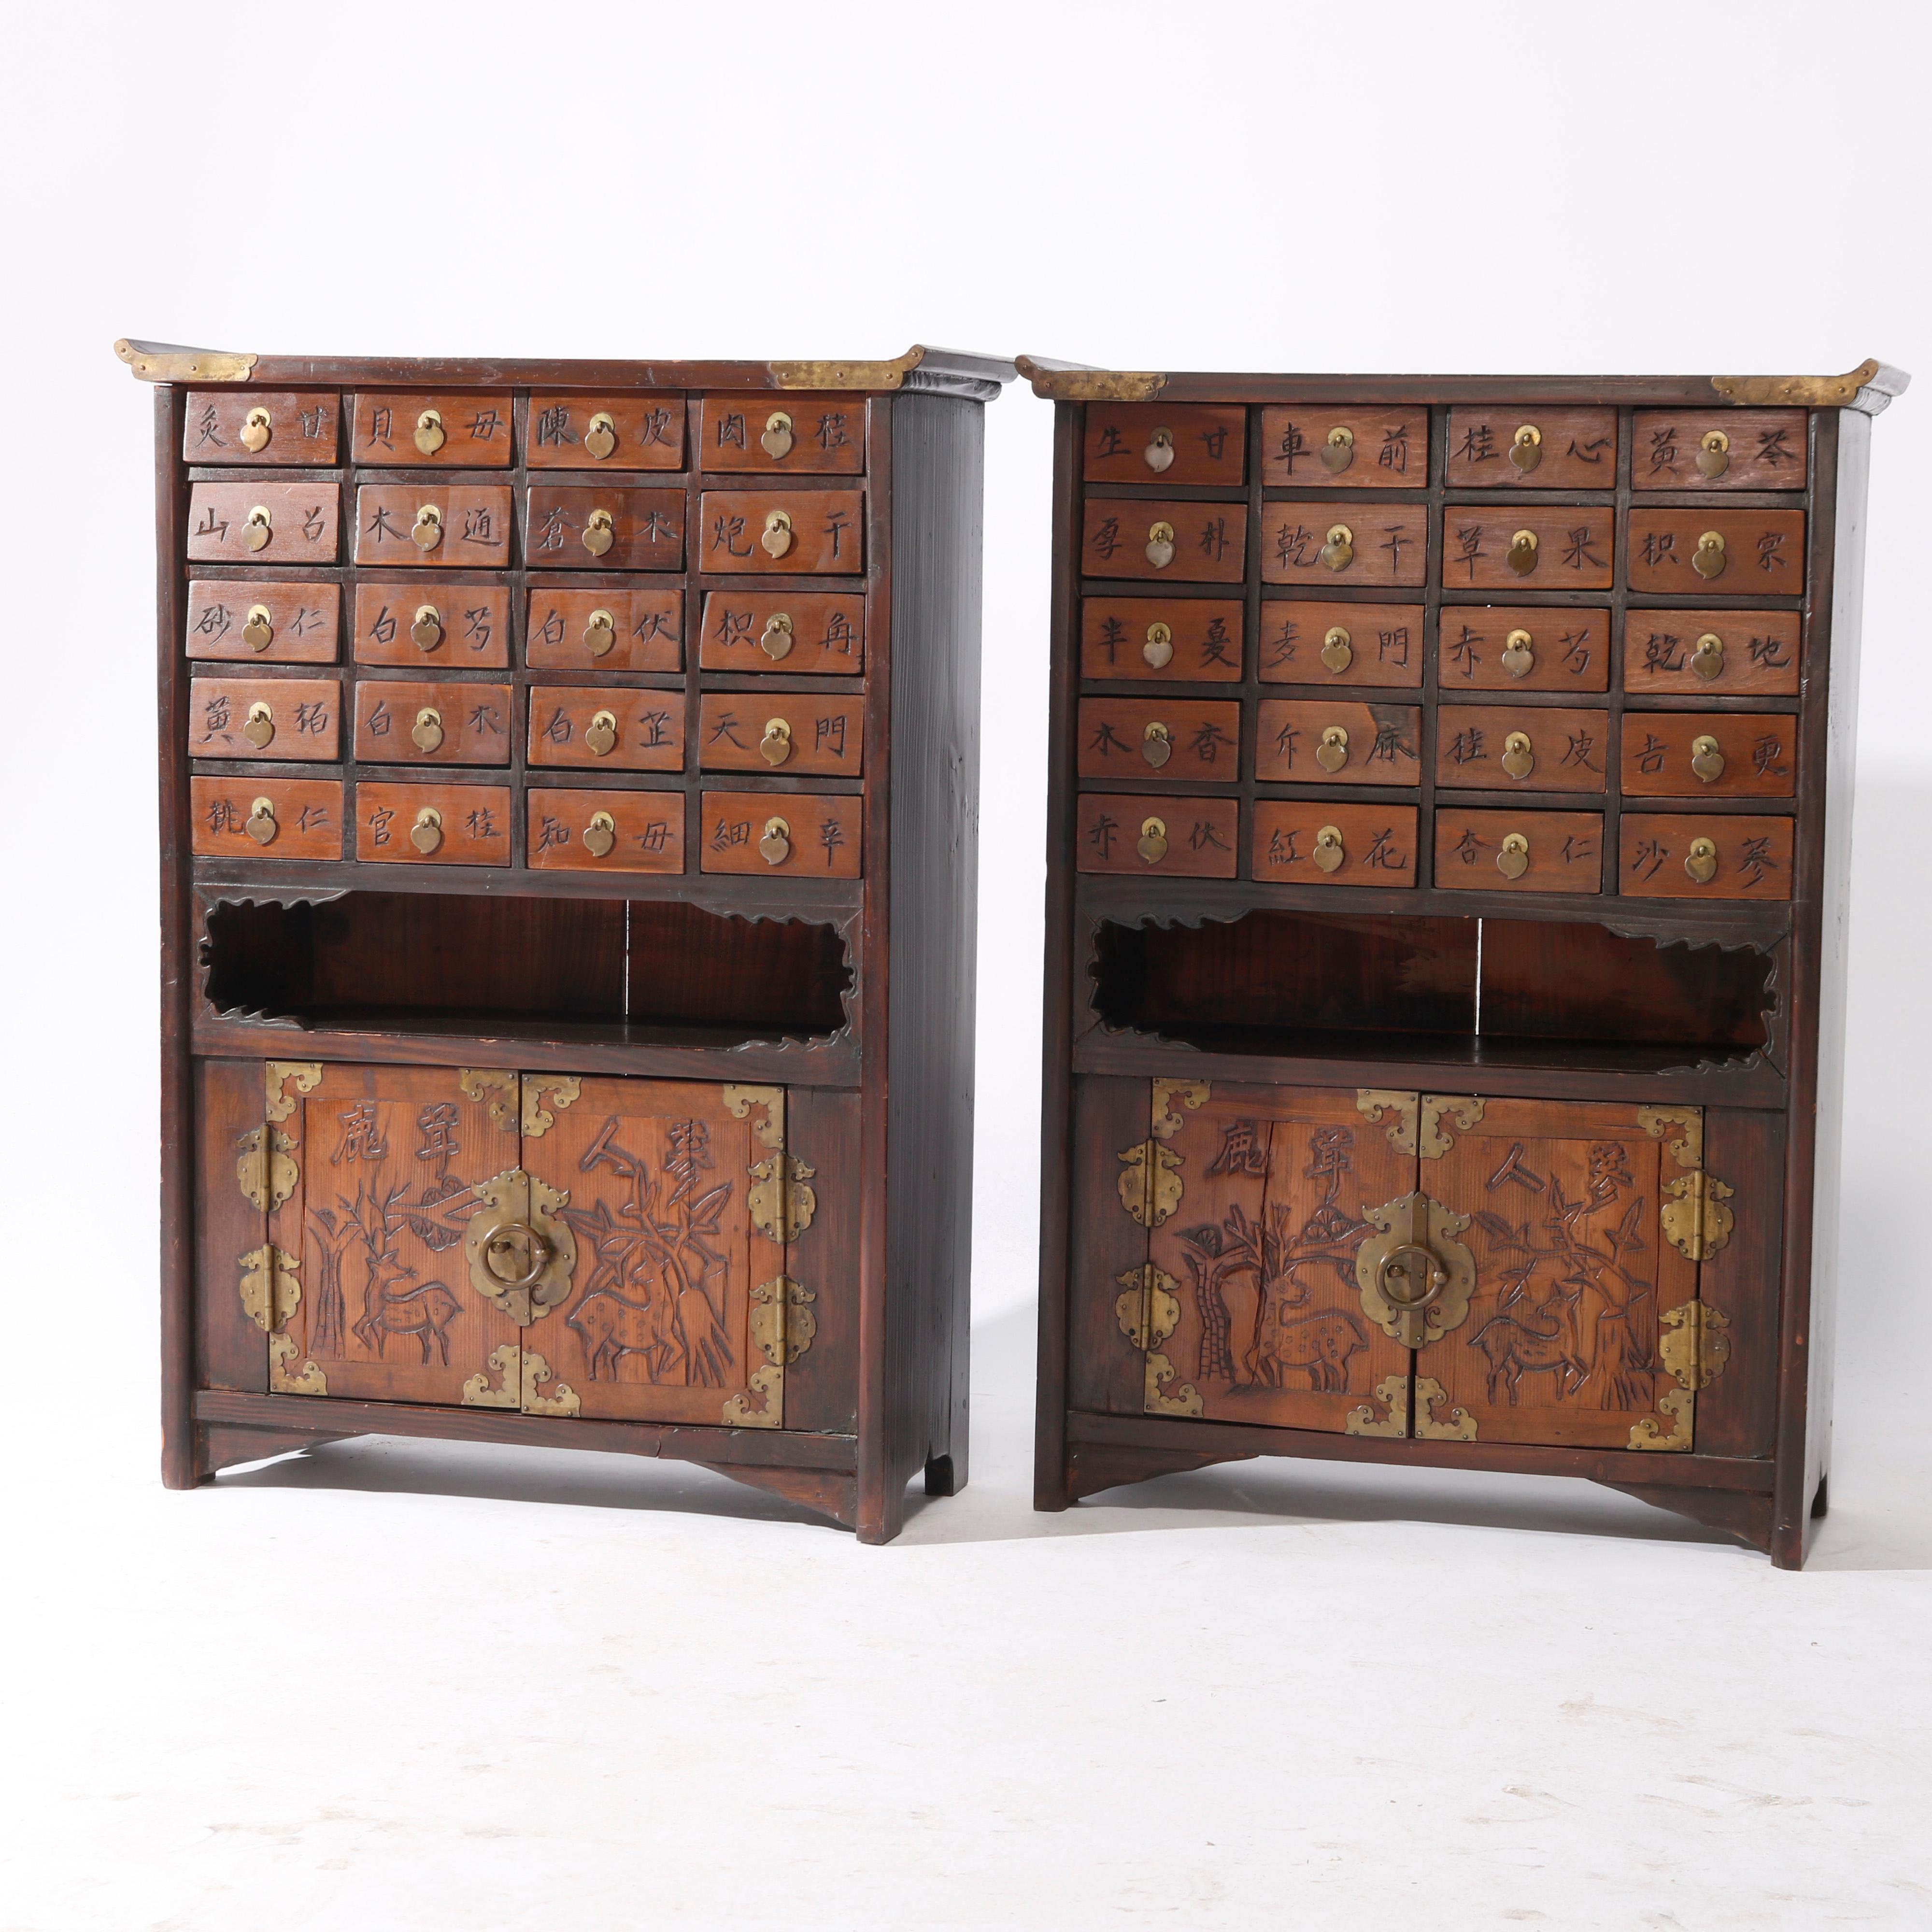 An antique pair of matching Chinese spice cabinets offers hardwood construction with twenty upper drawers each having chop mark characters over lower cabinet having double doors with carved deer scene, c1930

Measures - 29'' H X 21'' W X 8.75''